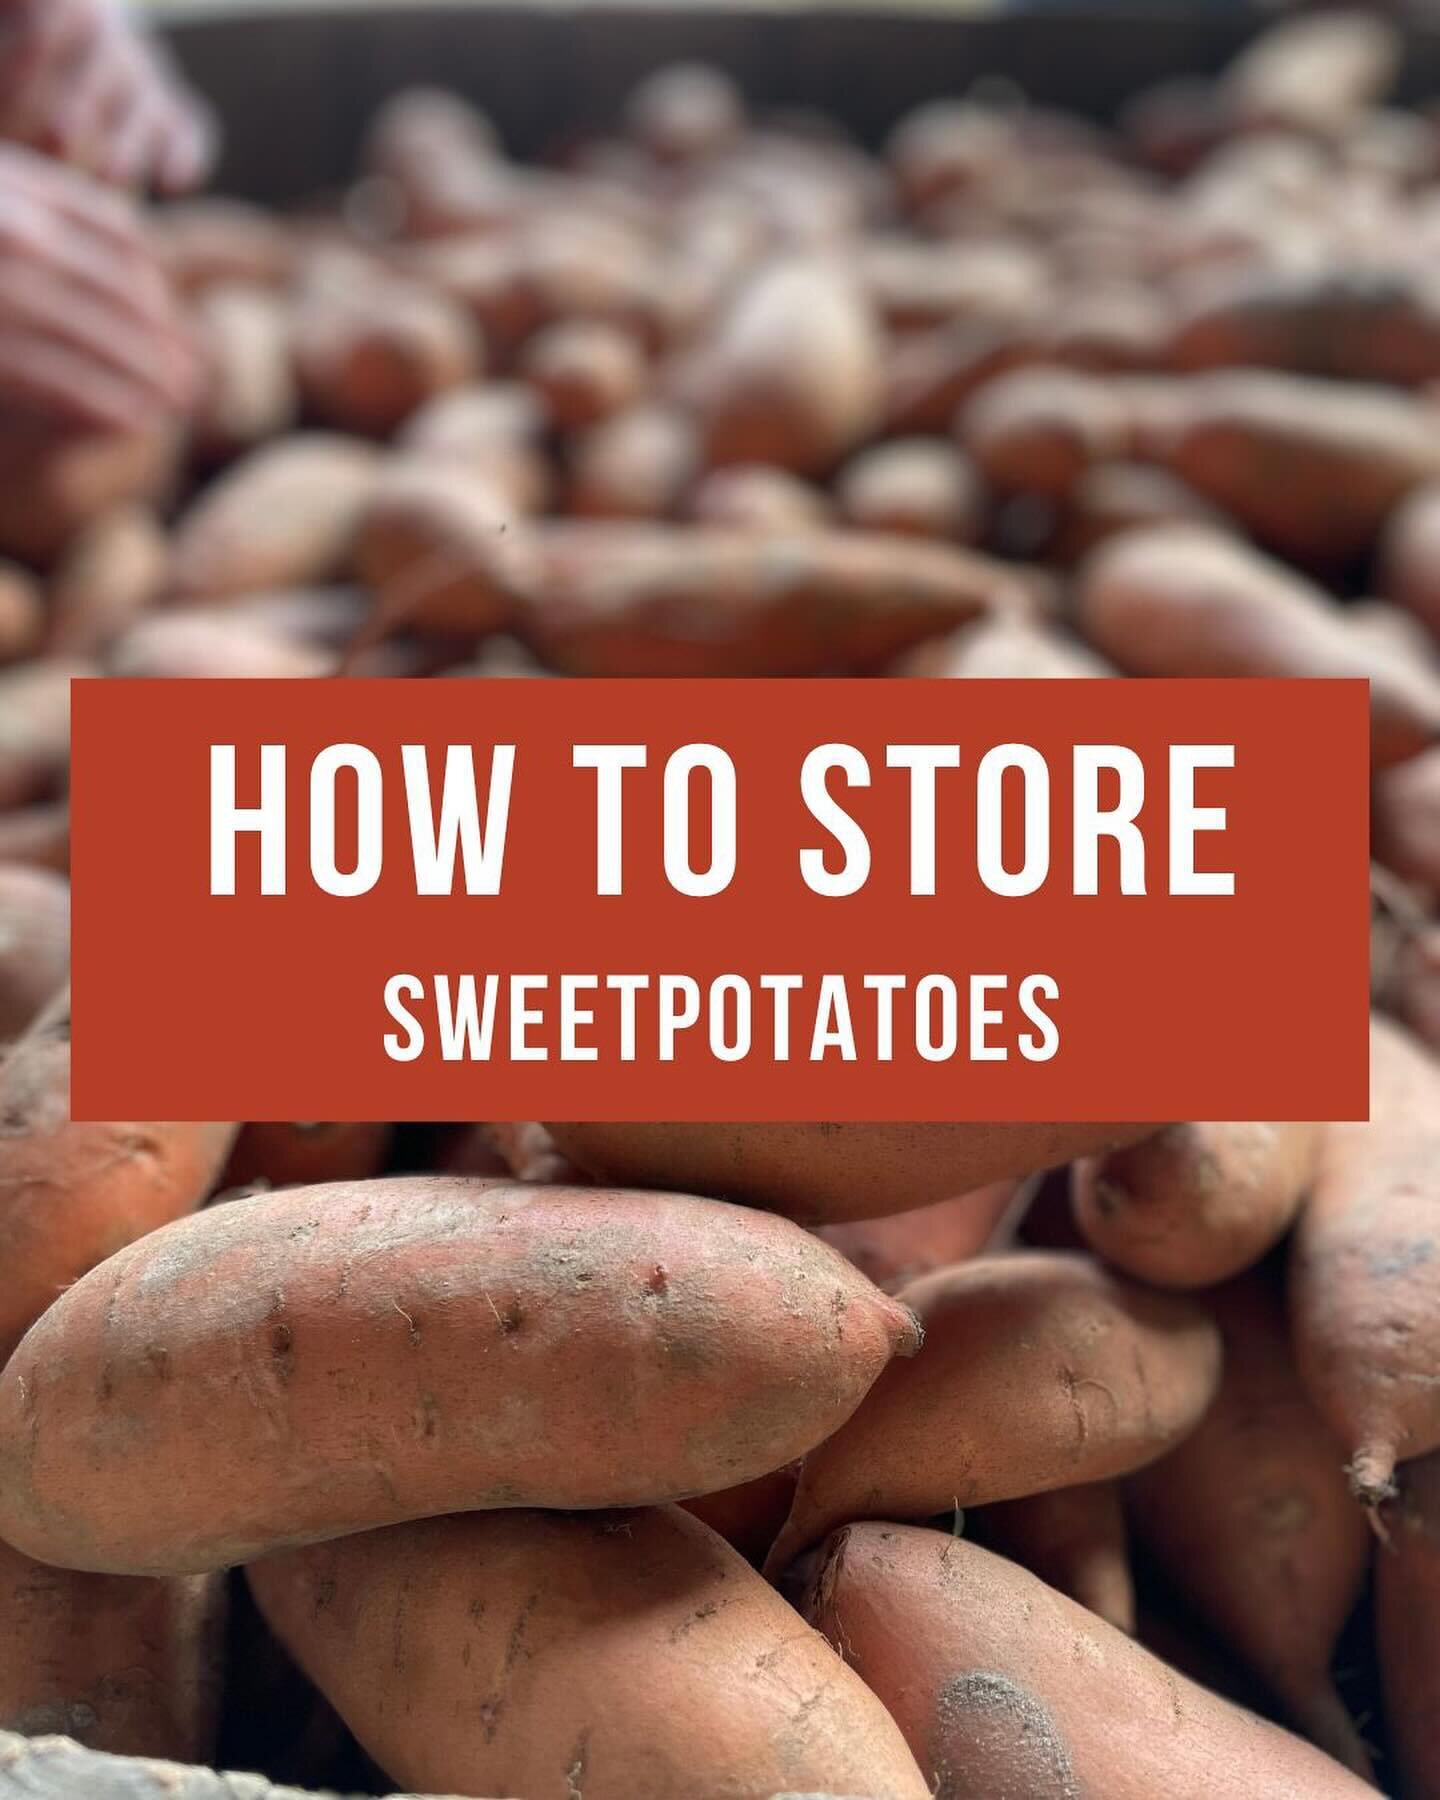 Curious about how to store your sweetpotatoes? We&rsquo;ve got a few tips for you!

#sweetpotatoes #ncsweetpotatoes #ncag #gottobenc #sweetpotatorecipe #sweetpotatofarm #agriculture